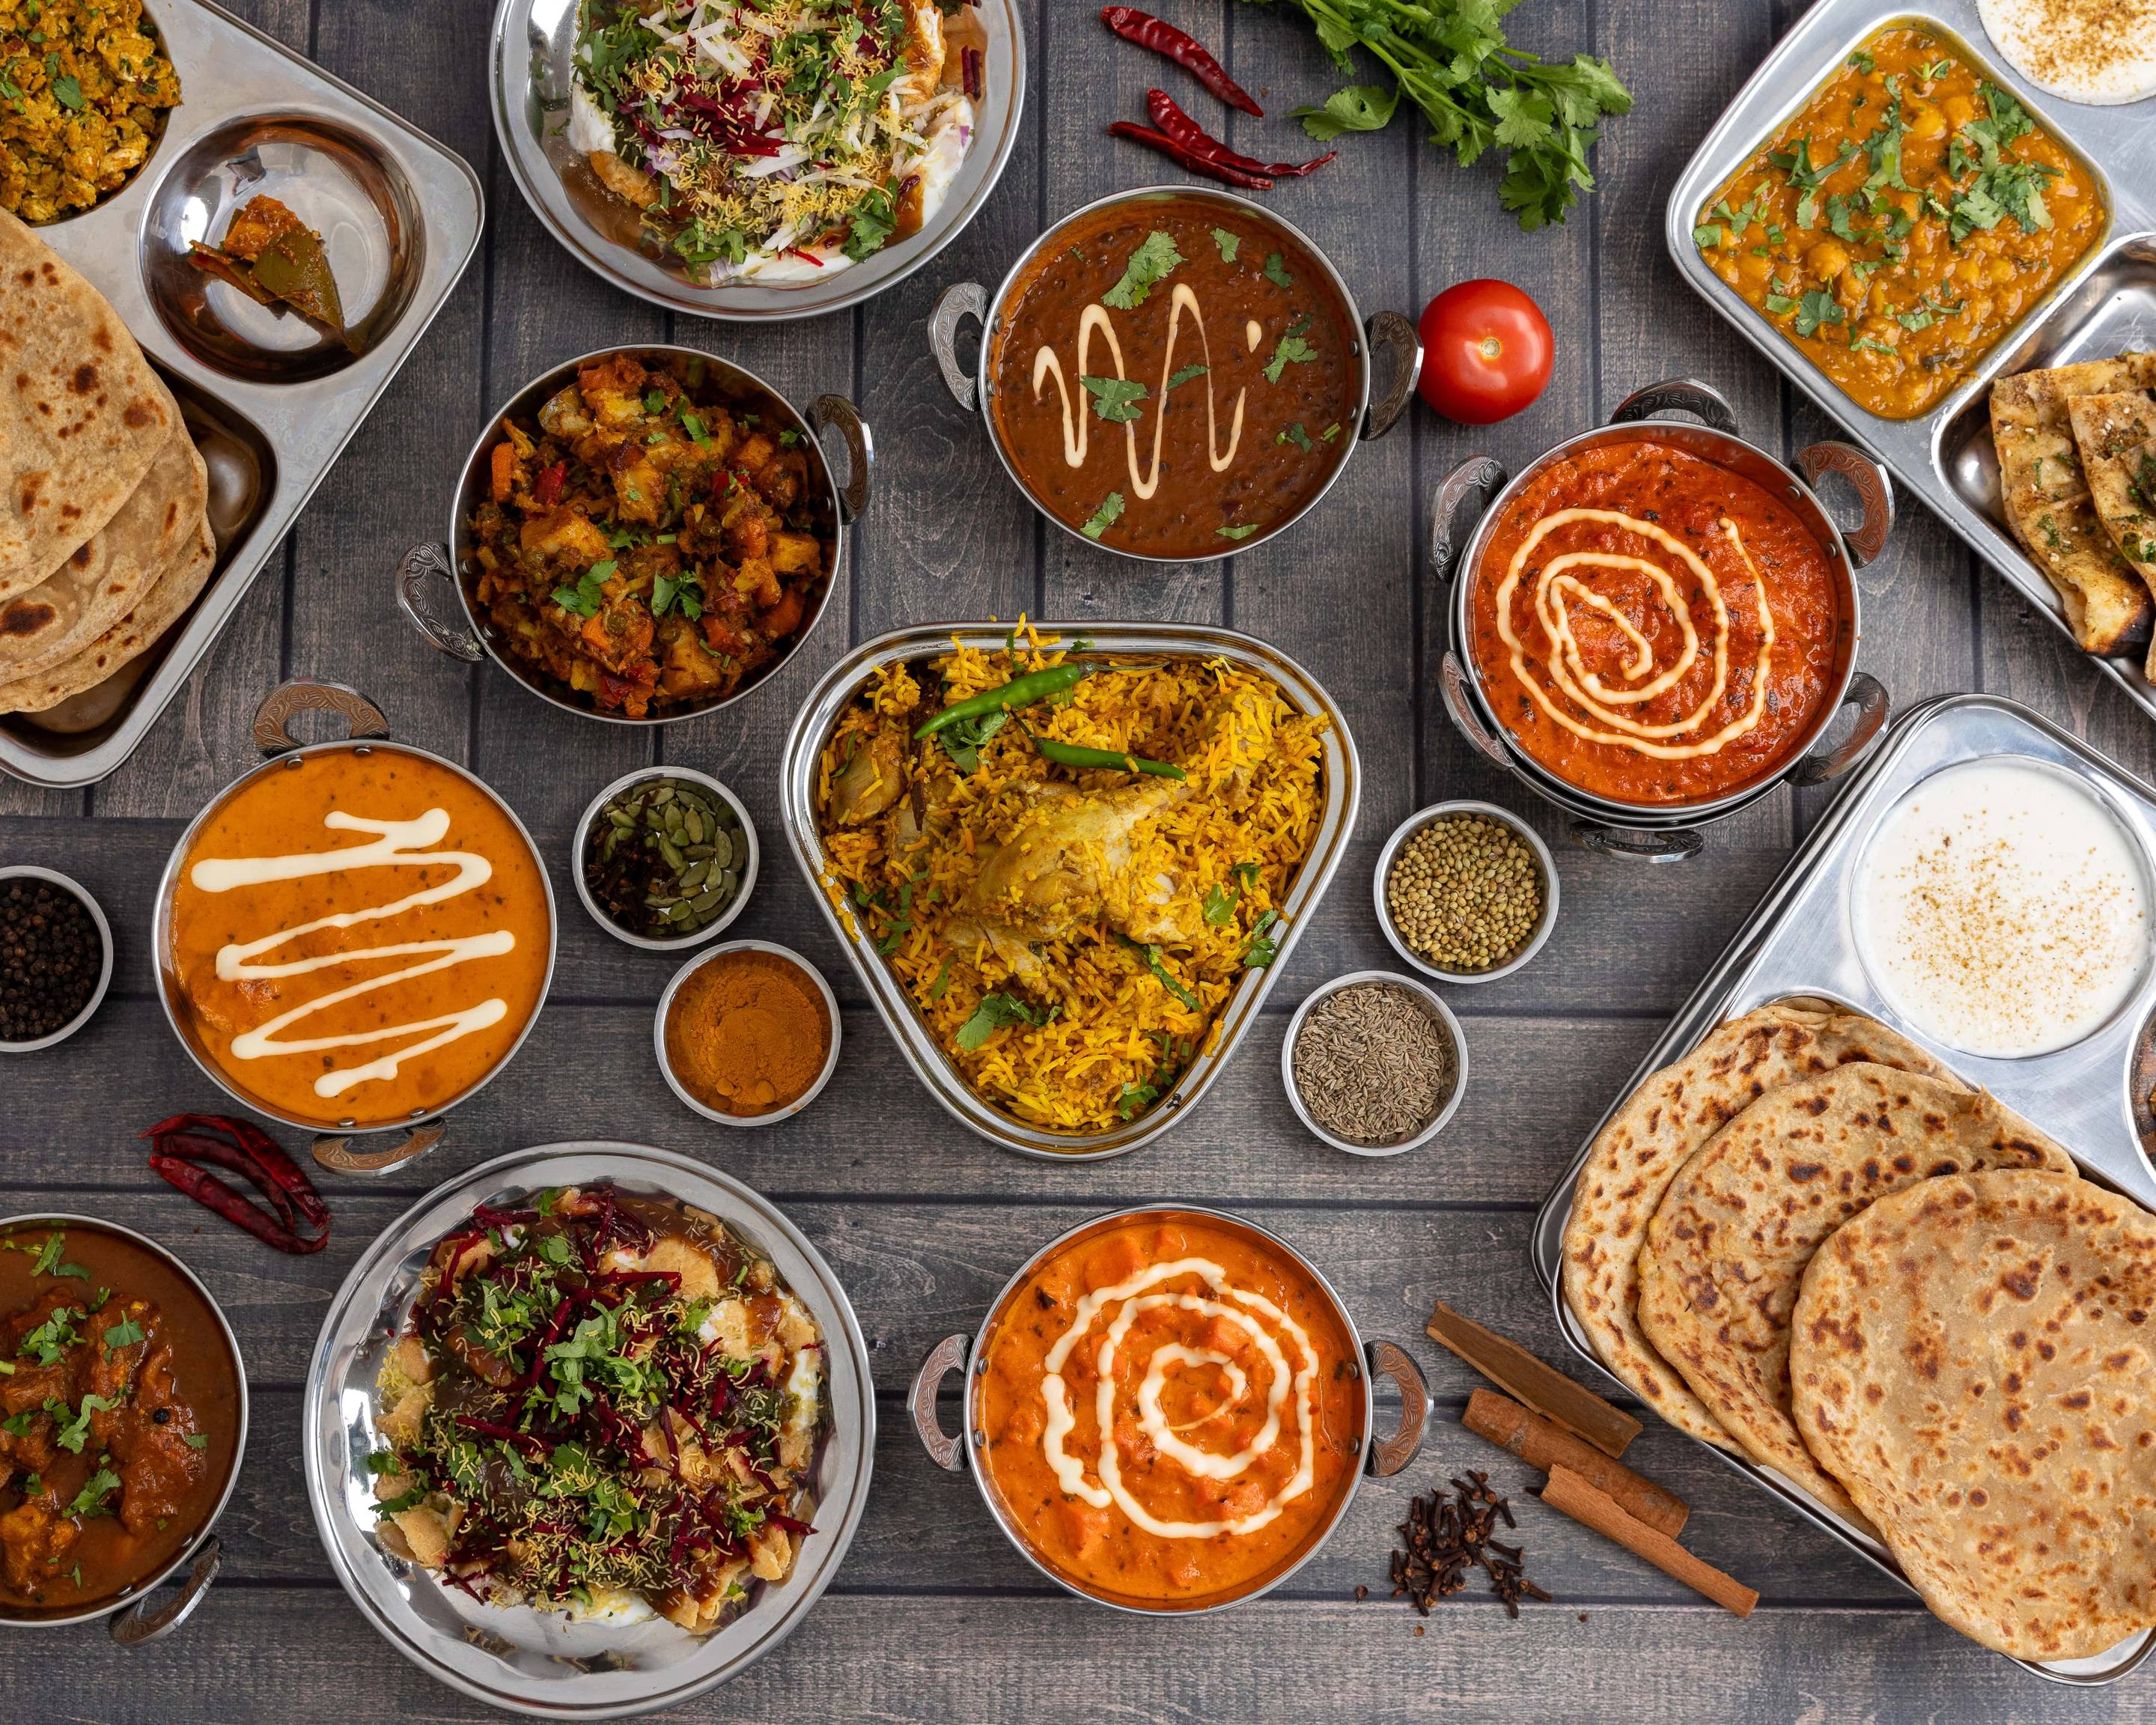 Dial A Curry Restaurant Menu - Takeout in Adelaide | Delivery Menu ...